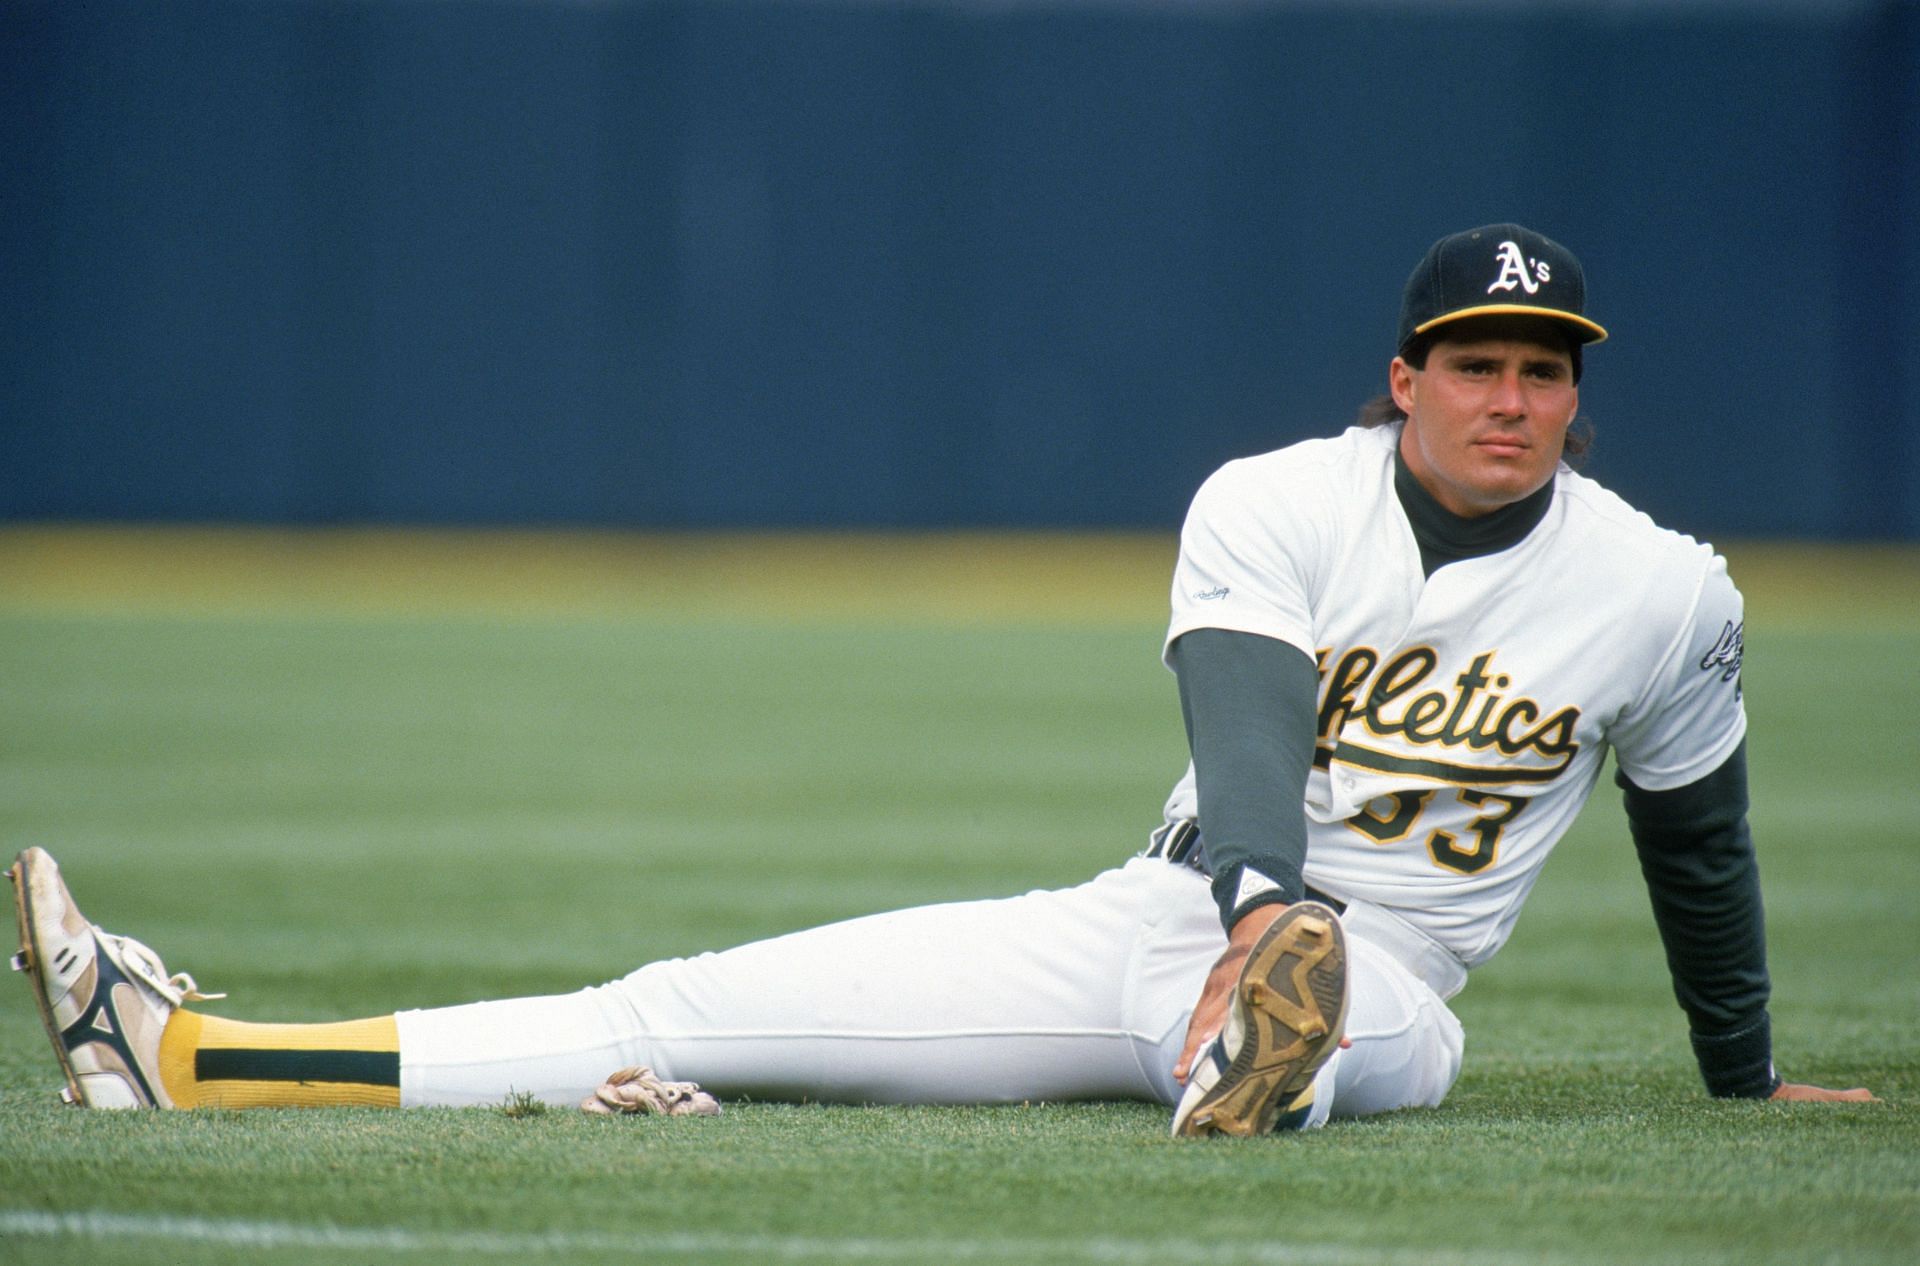 WATCH: Former MLB star Jose Canseco shows he hasn't lost his power